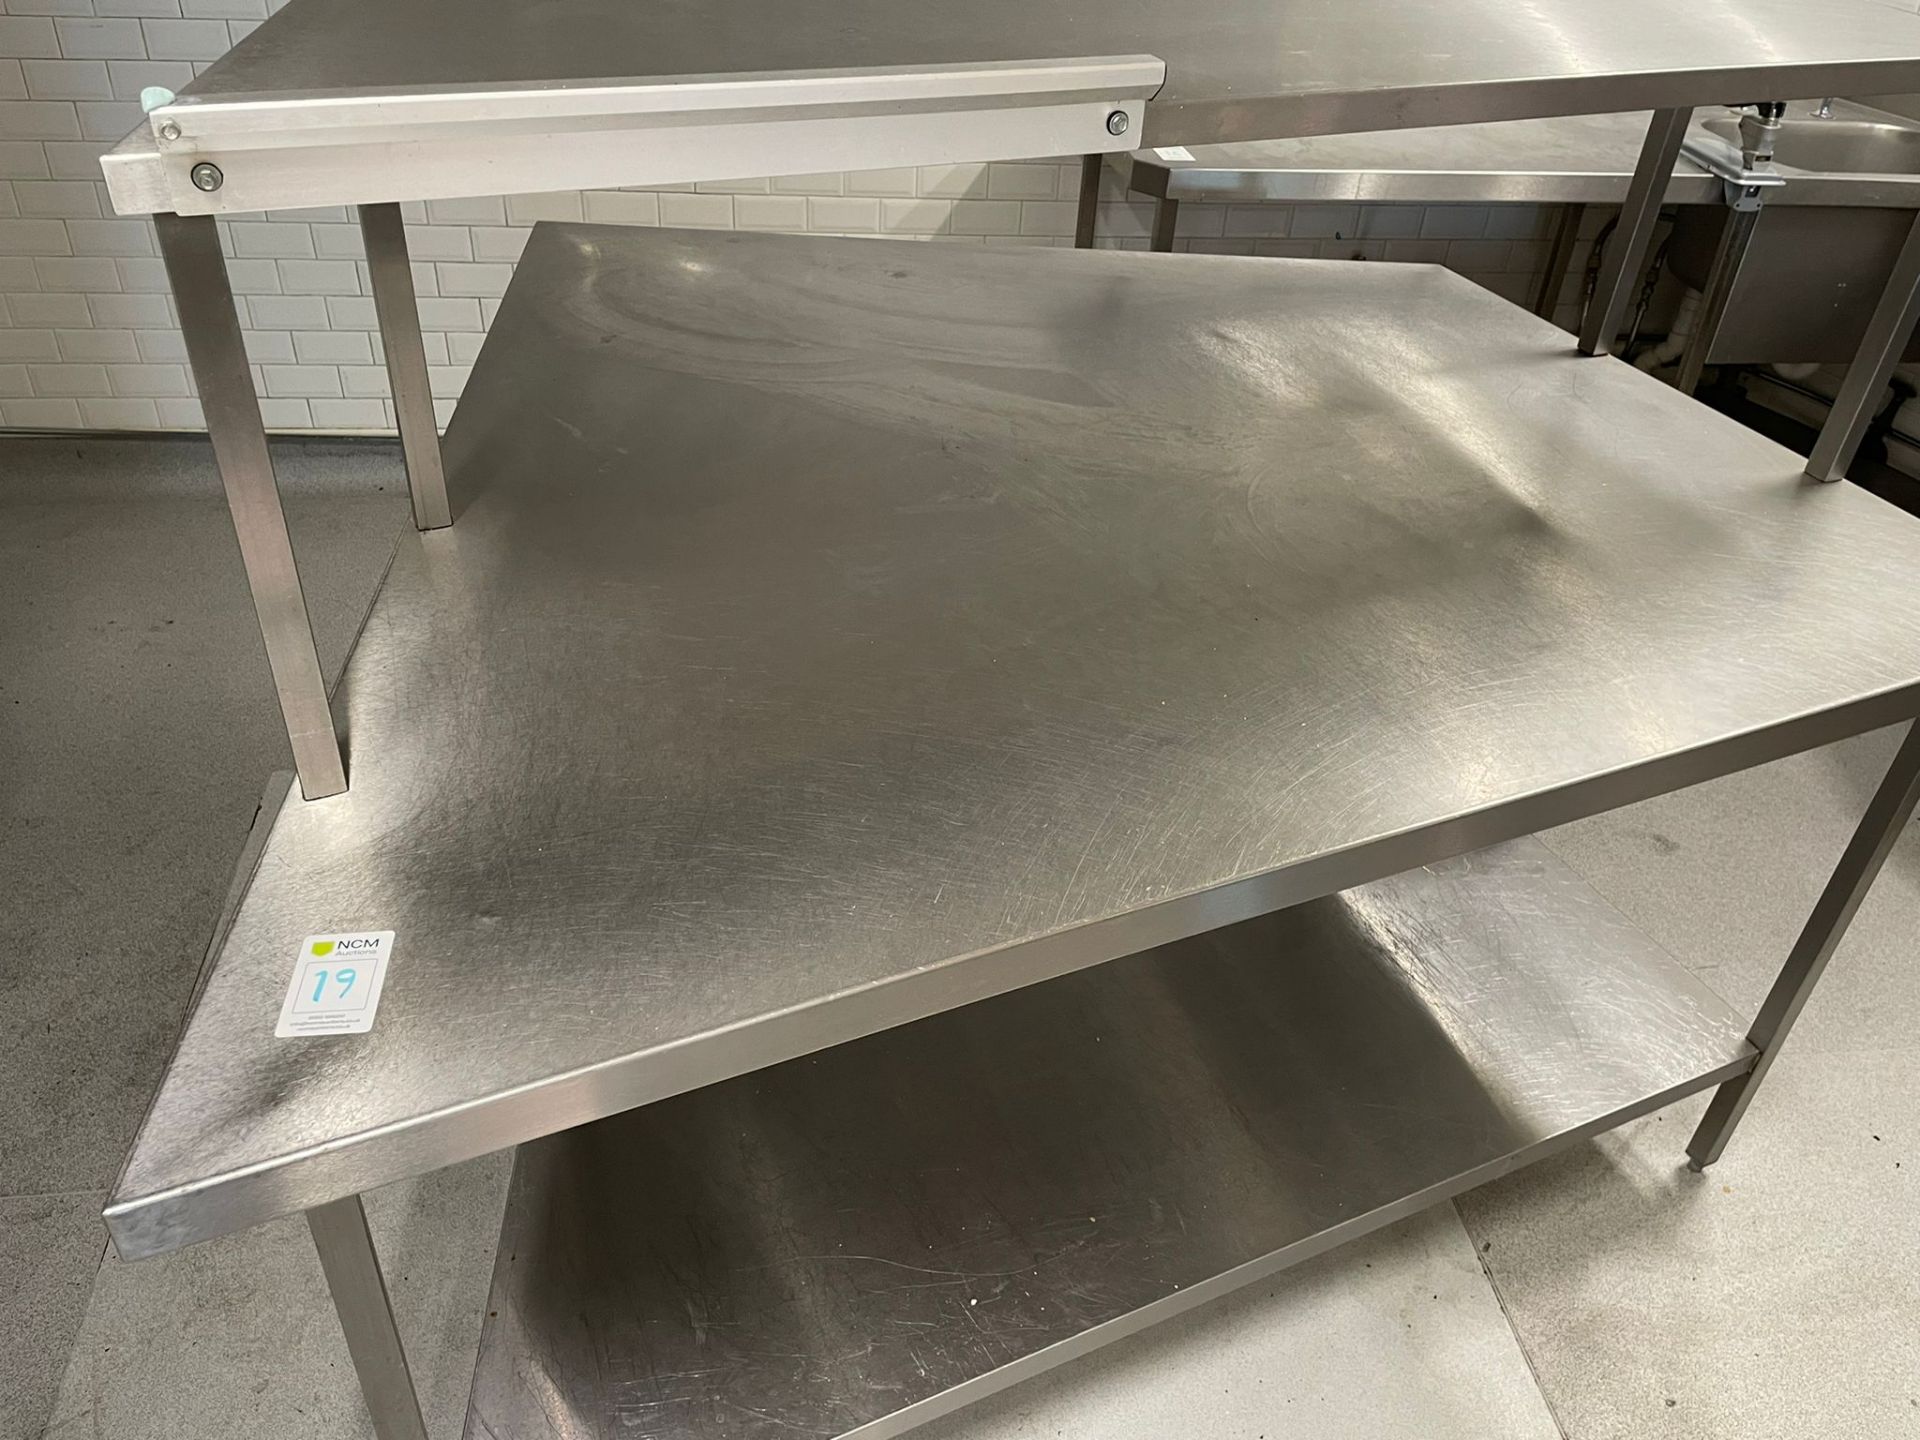 Stainless Steel Prep Station - Image 4 of 5